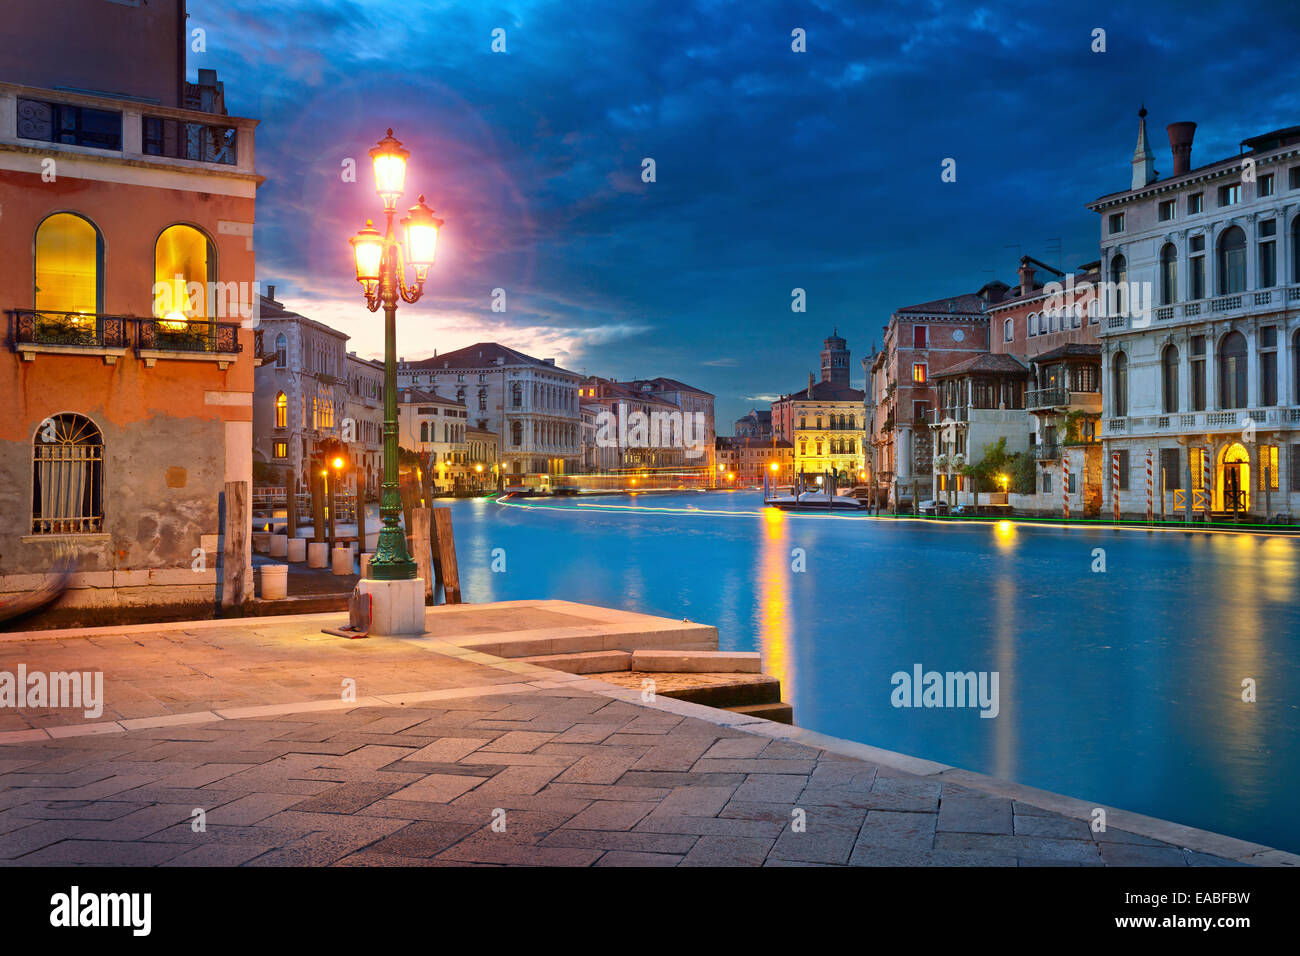 Venice.  Image of Grand Canal in Venice, Italy during twilight blue hour. Stock Photo